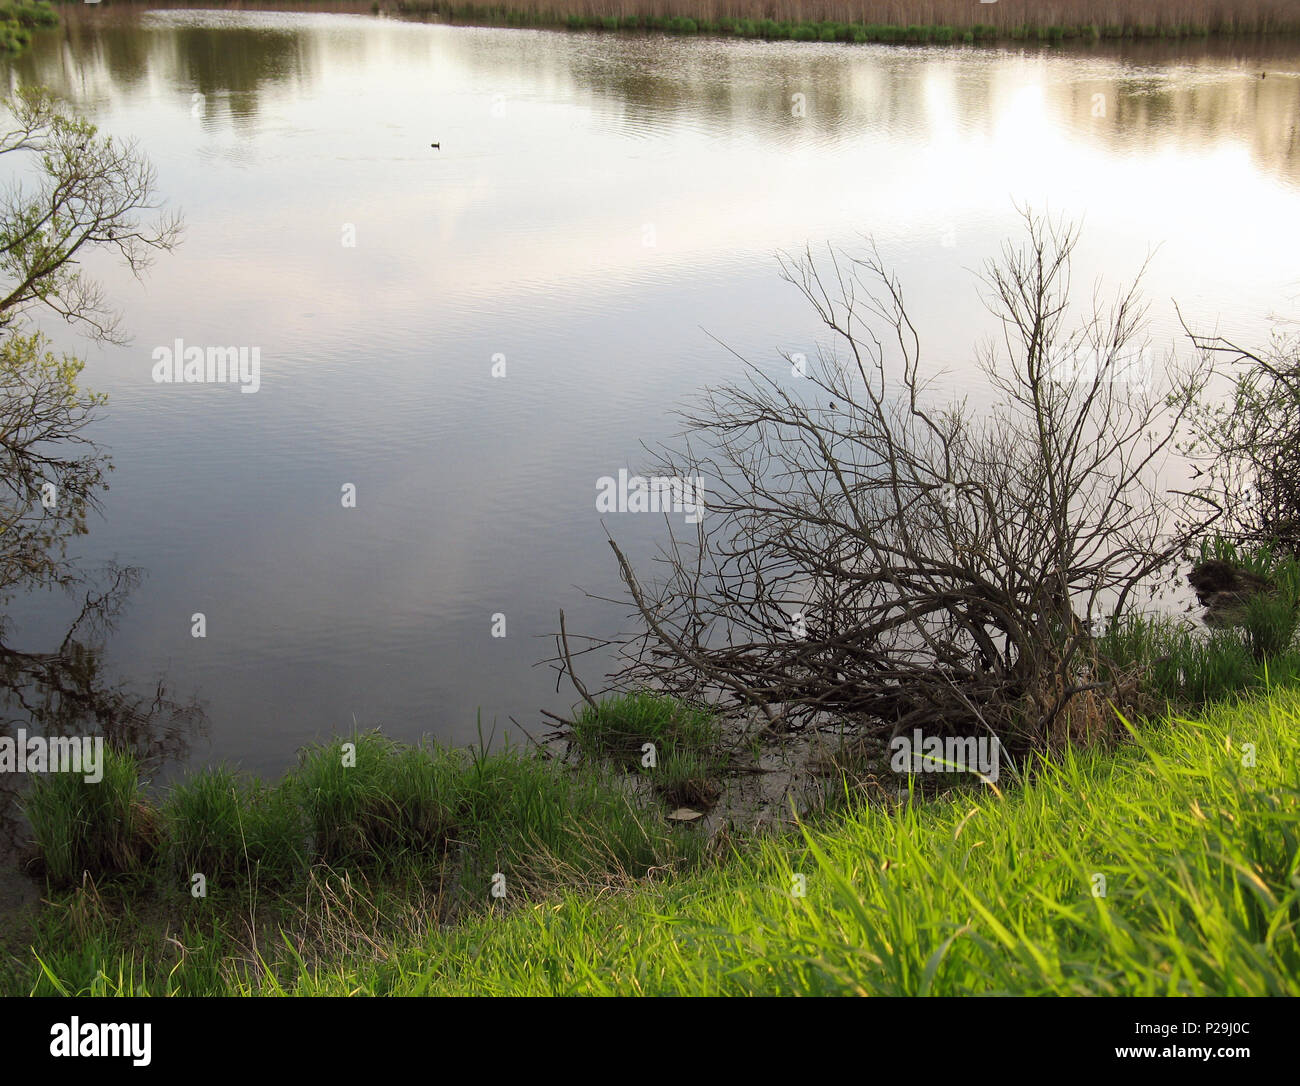 Pond shore overgrown with grass, withered bush and sky with clouds reflected on the water surface Stock Photo